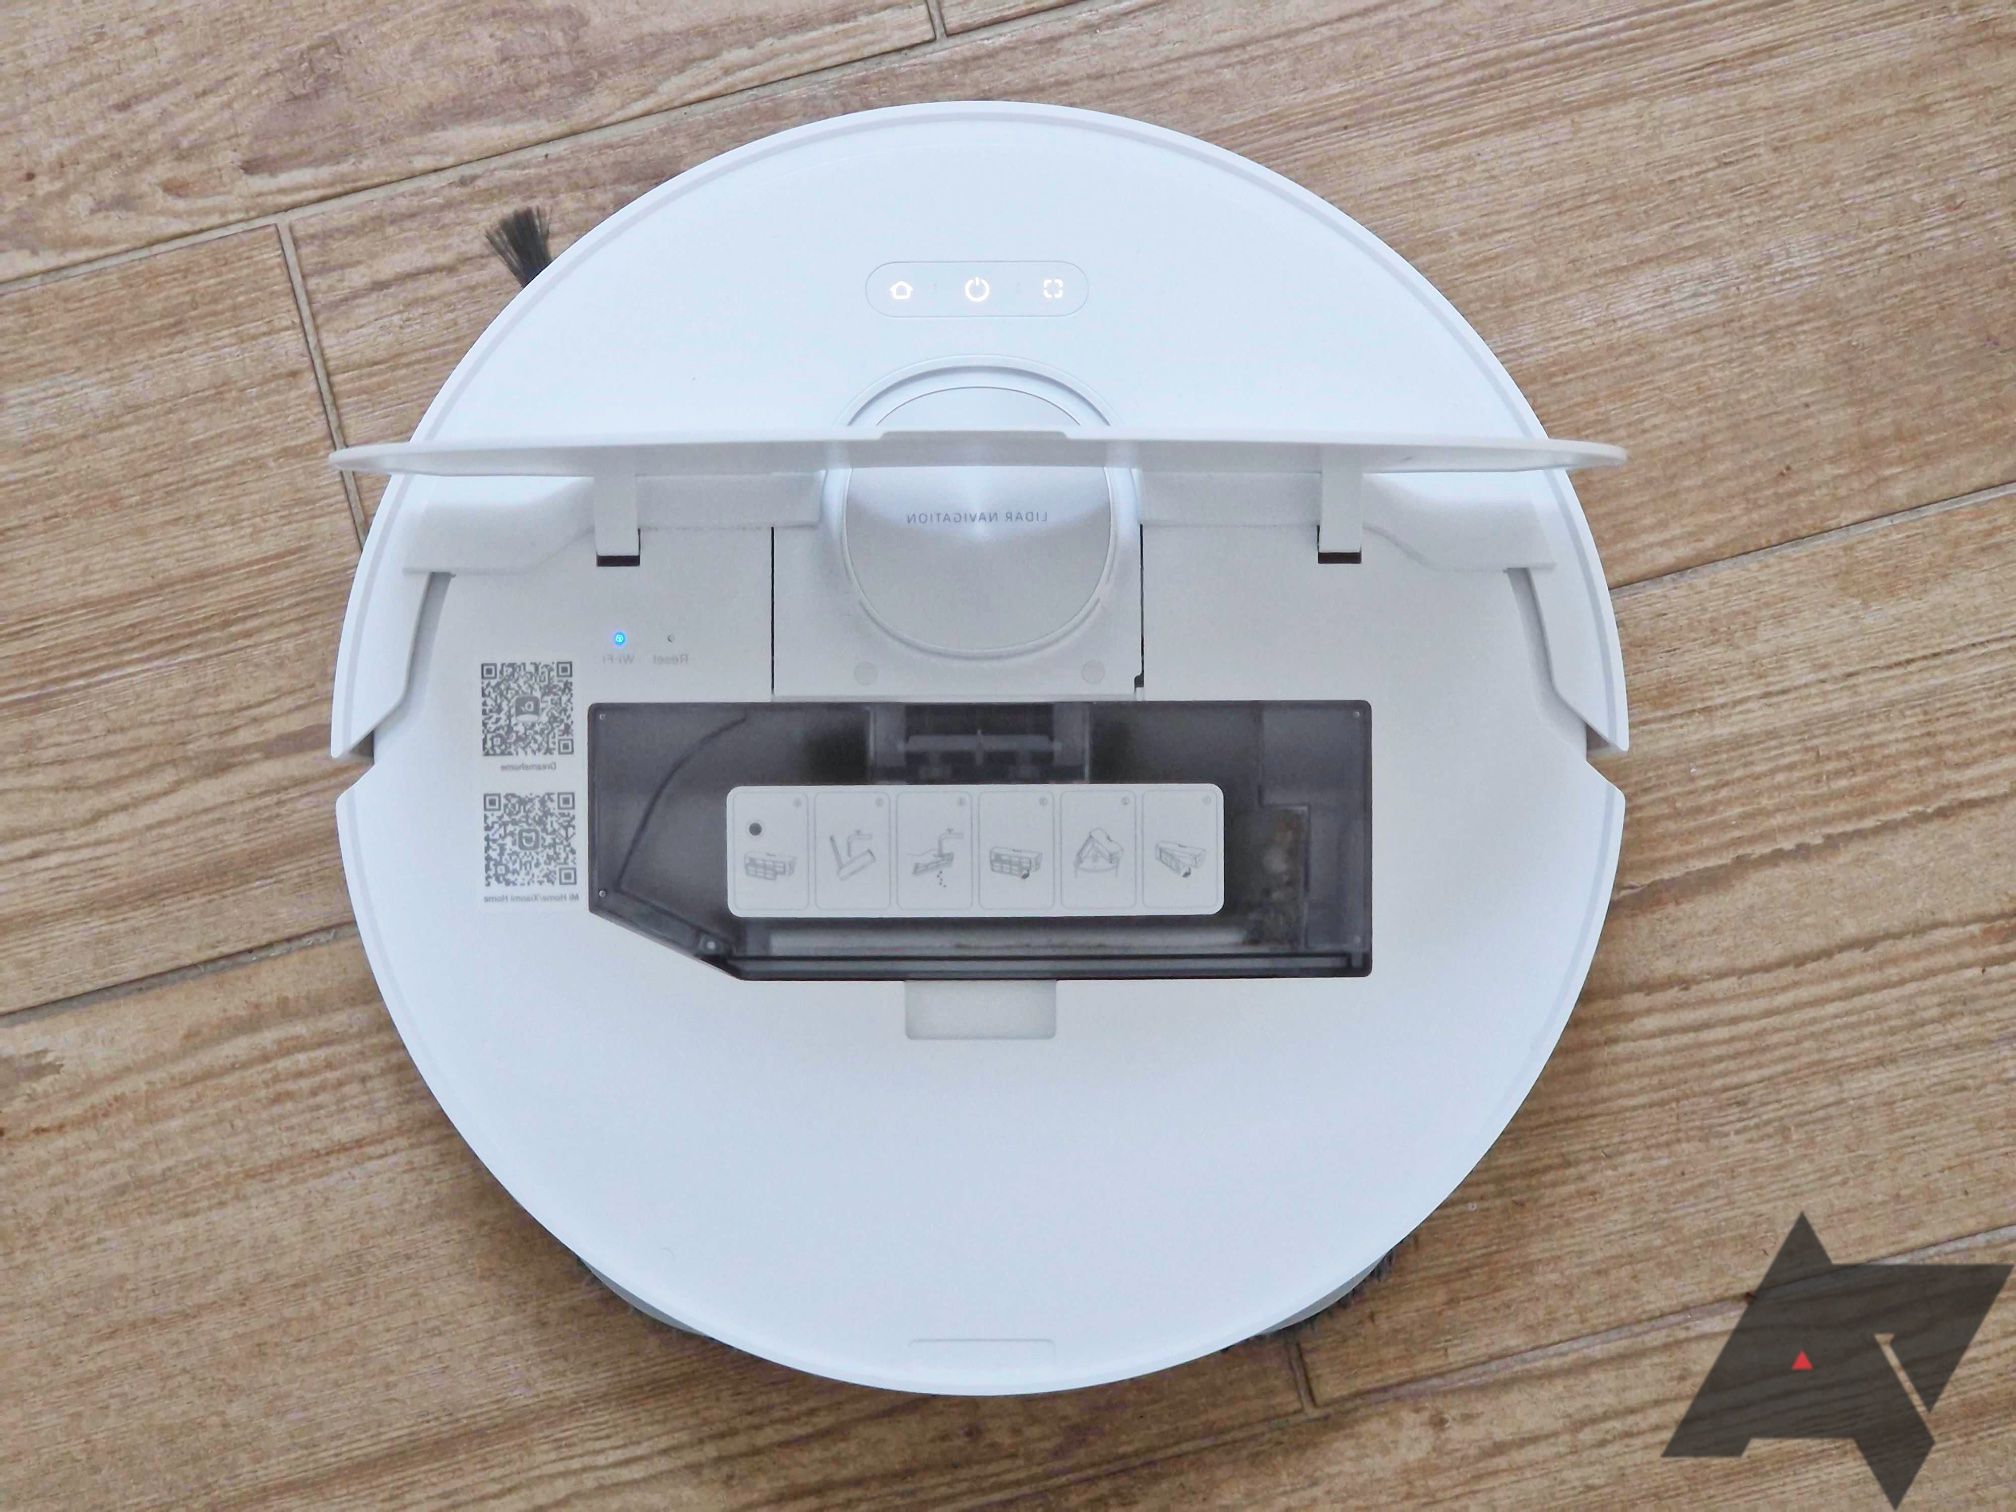 Dreame Bot L10s Ultra Review: The Best robot vacuum of 2022